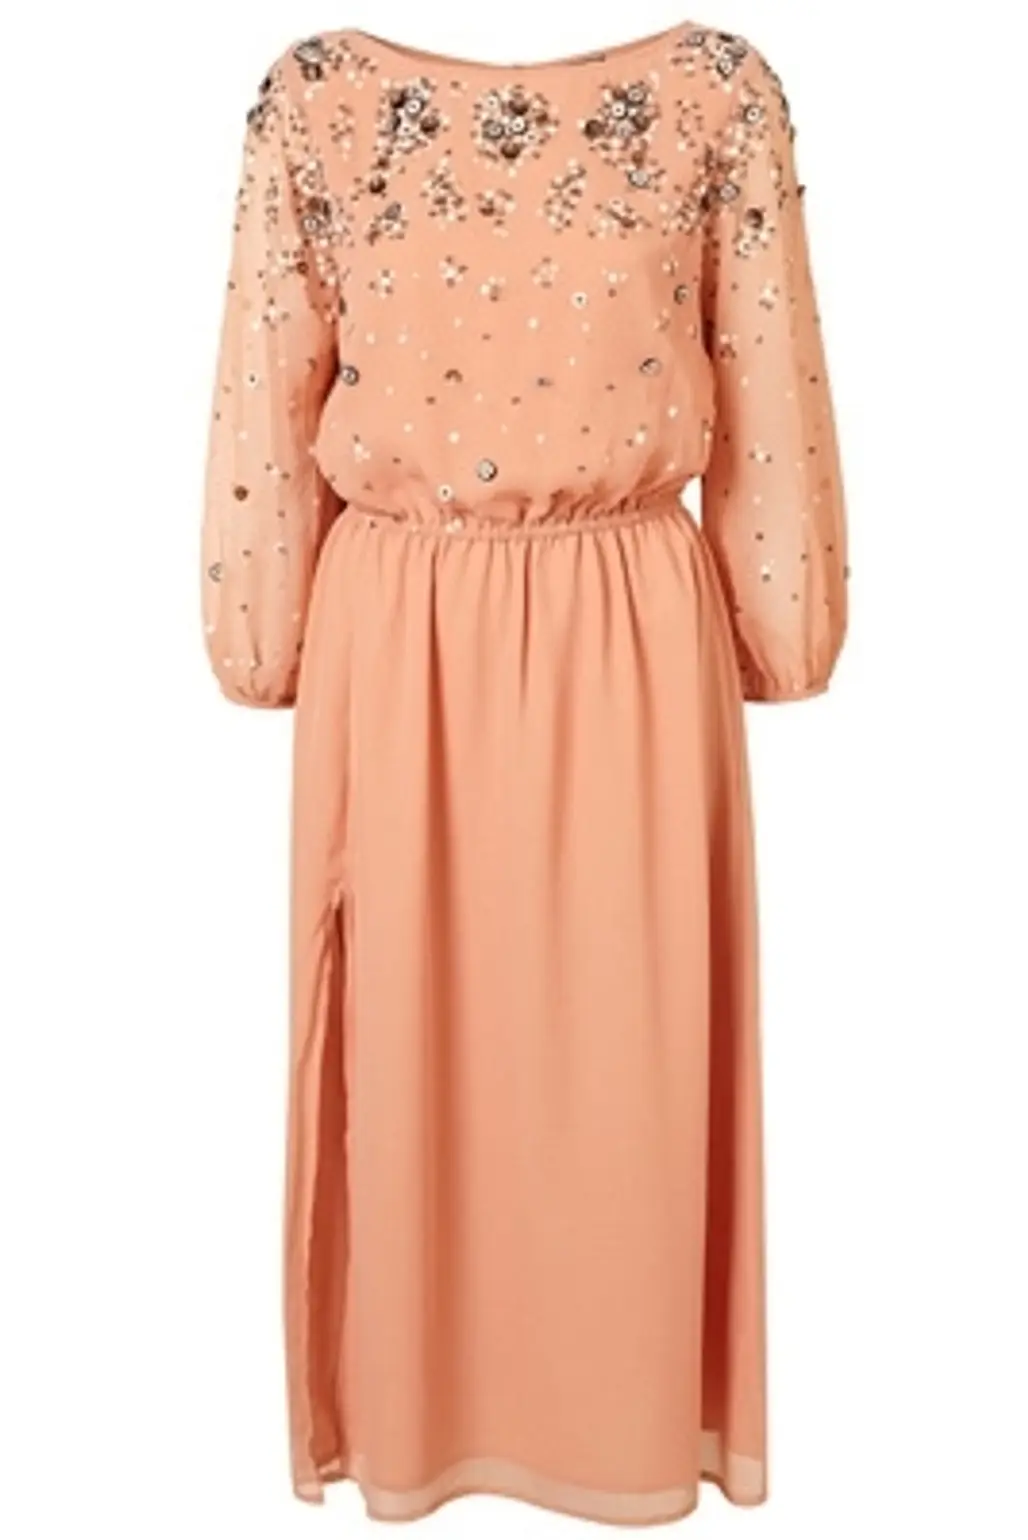 Topshop Limited Edition Scattered Bead Maxi Dress